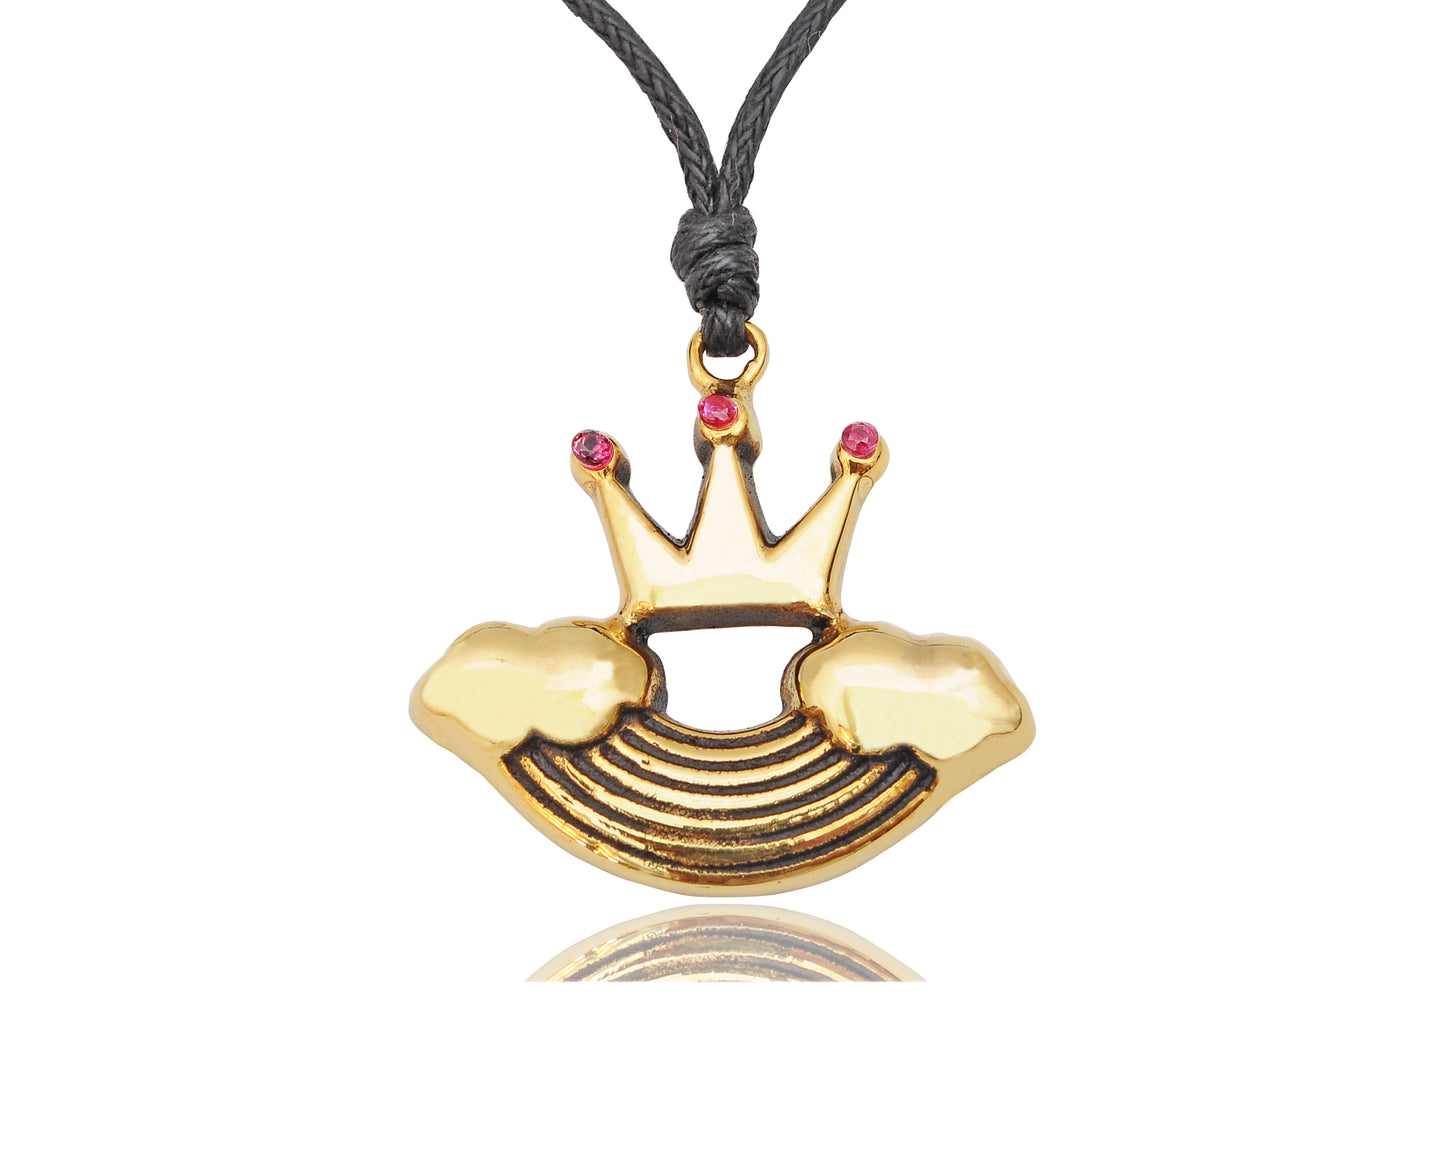 Colorful Rainbow Crown Handmade Gold Brass Necklace Pendant Jewelry